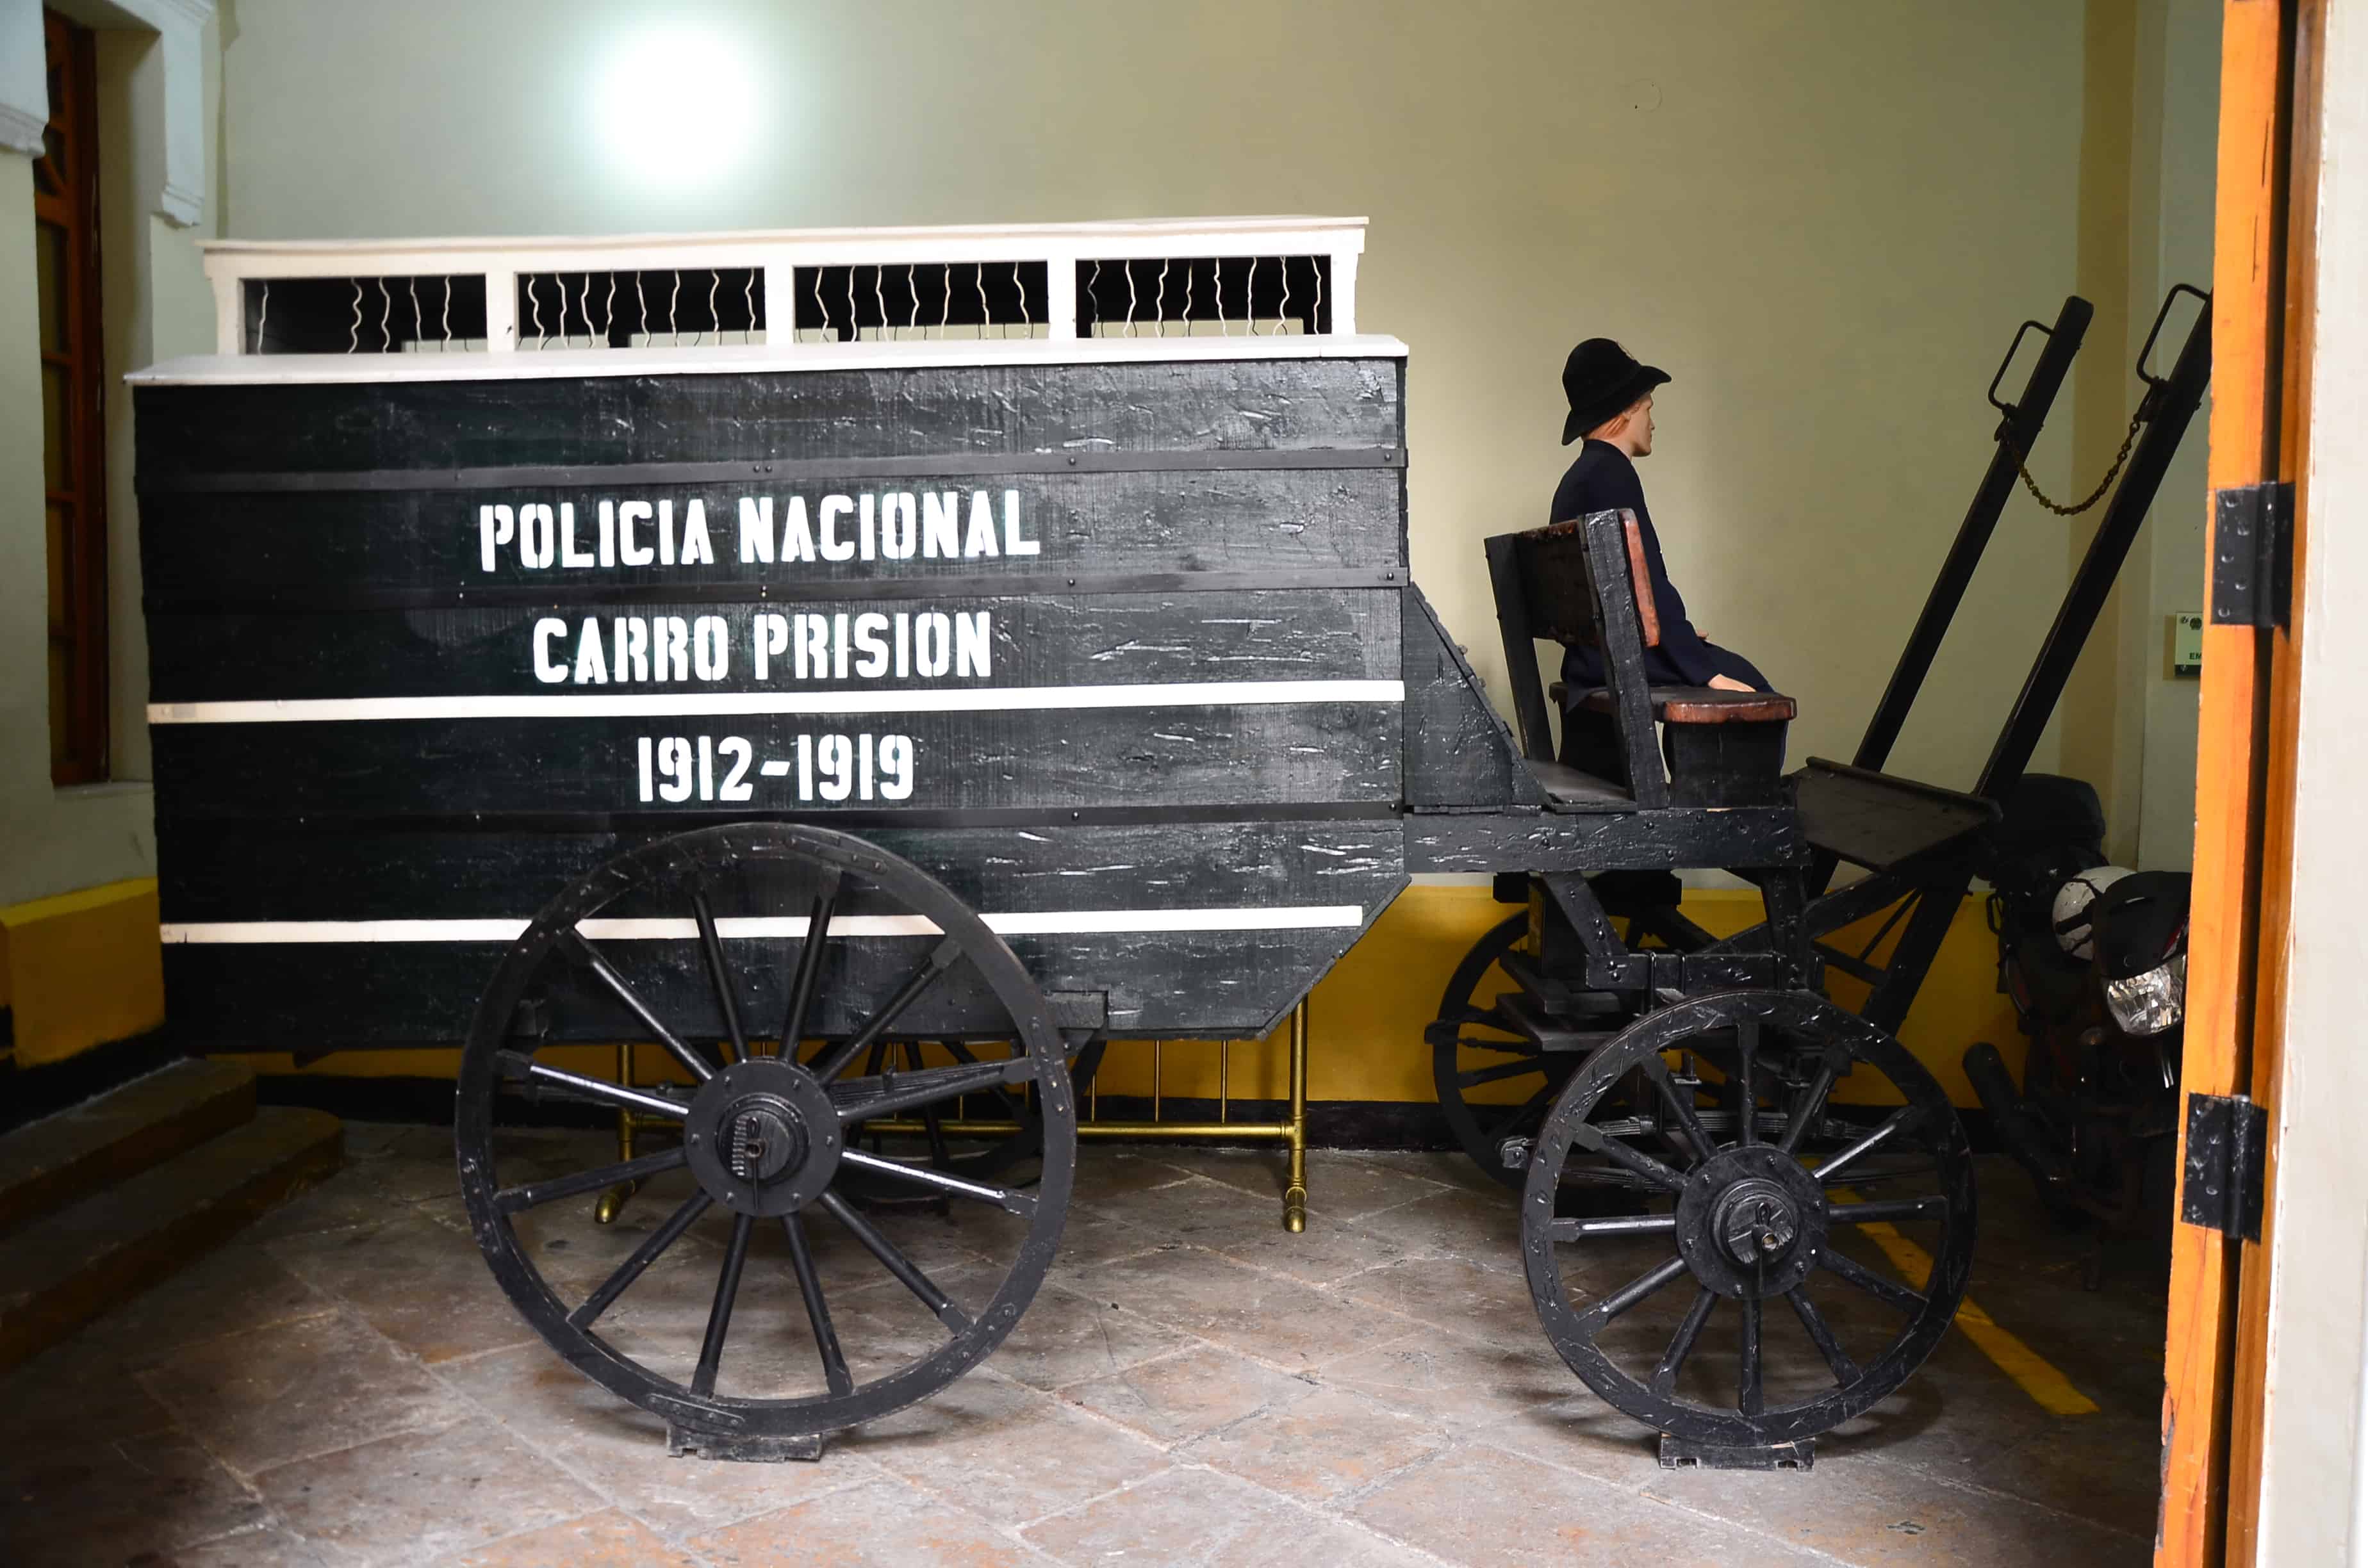 Historic police wagon at the National Police History Museum in La Candelaria, Bogotá, Colombia